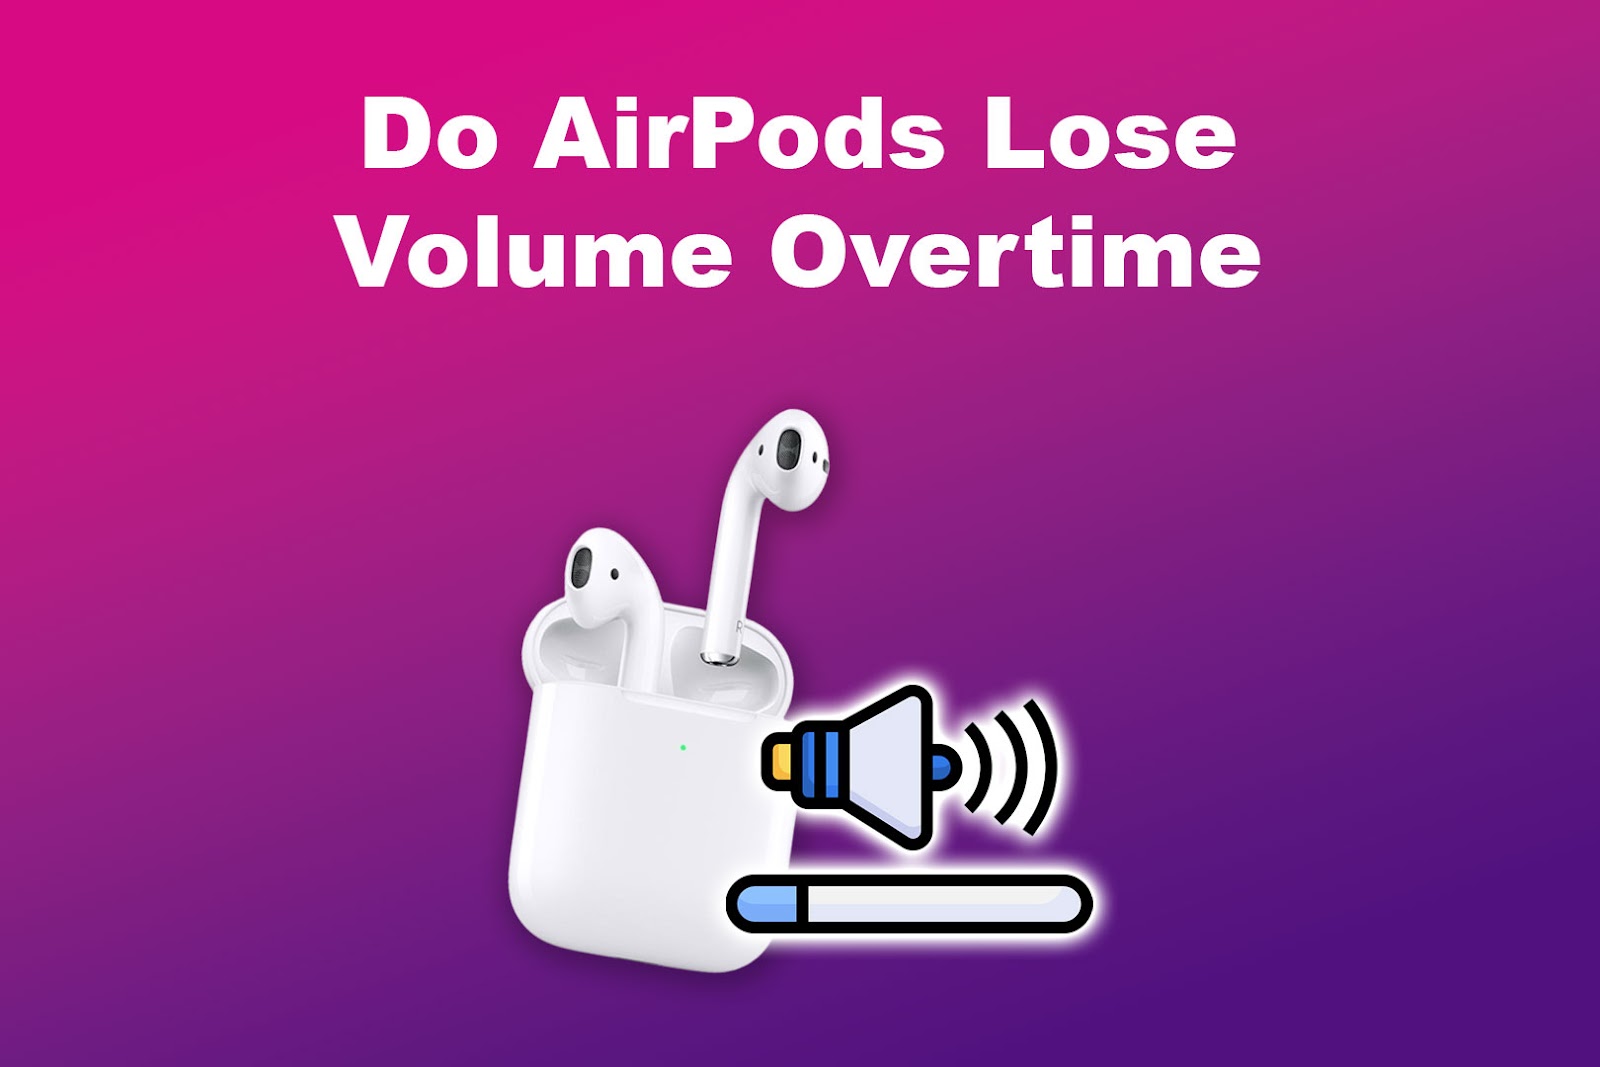 Do AirPods Lose Volume Overtime